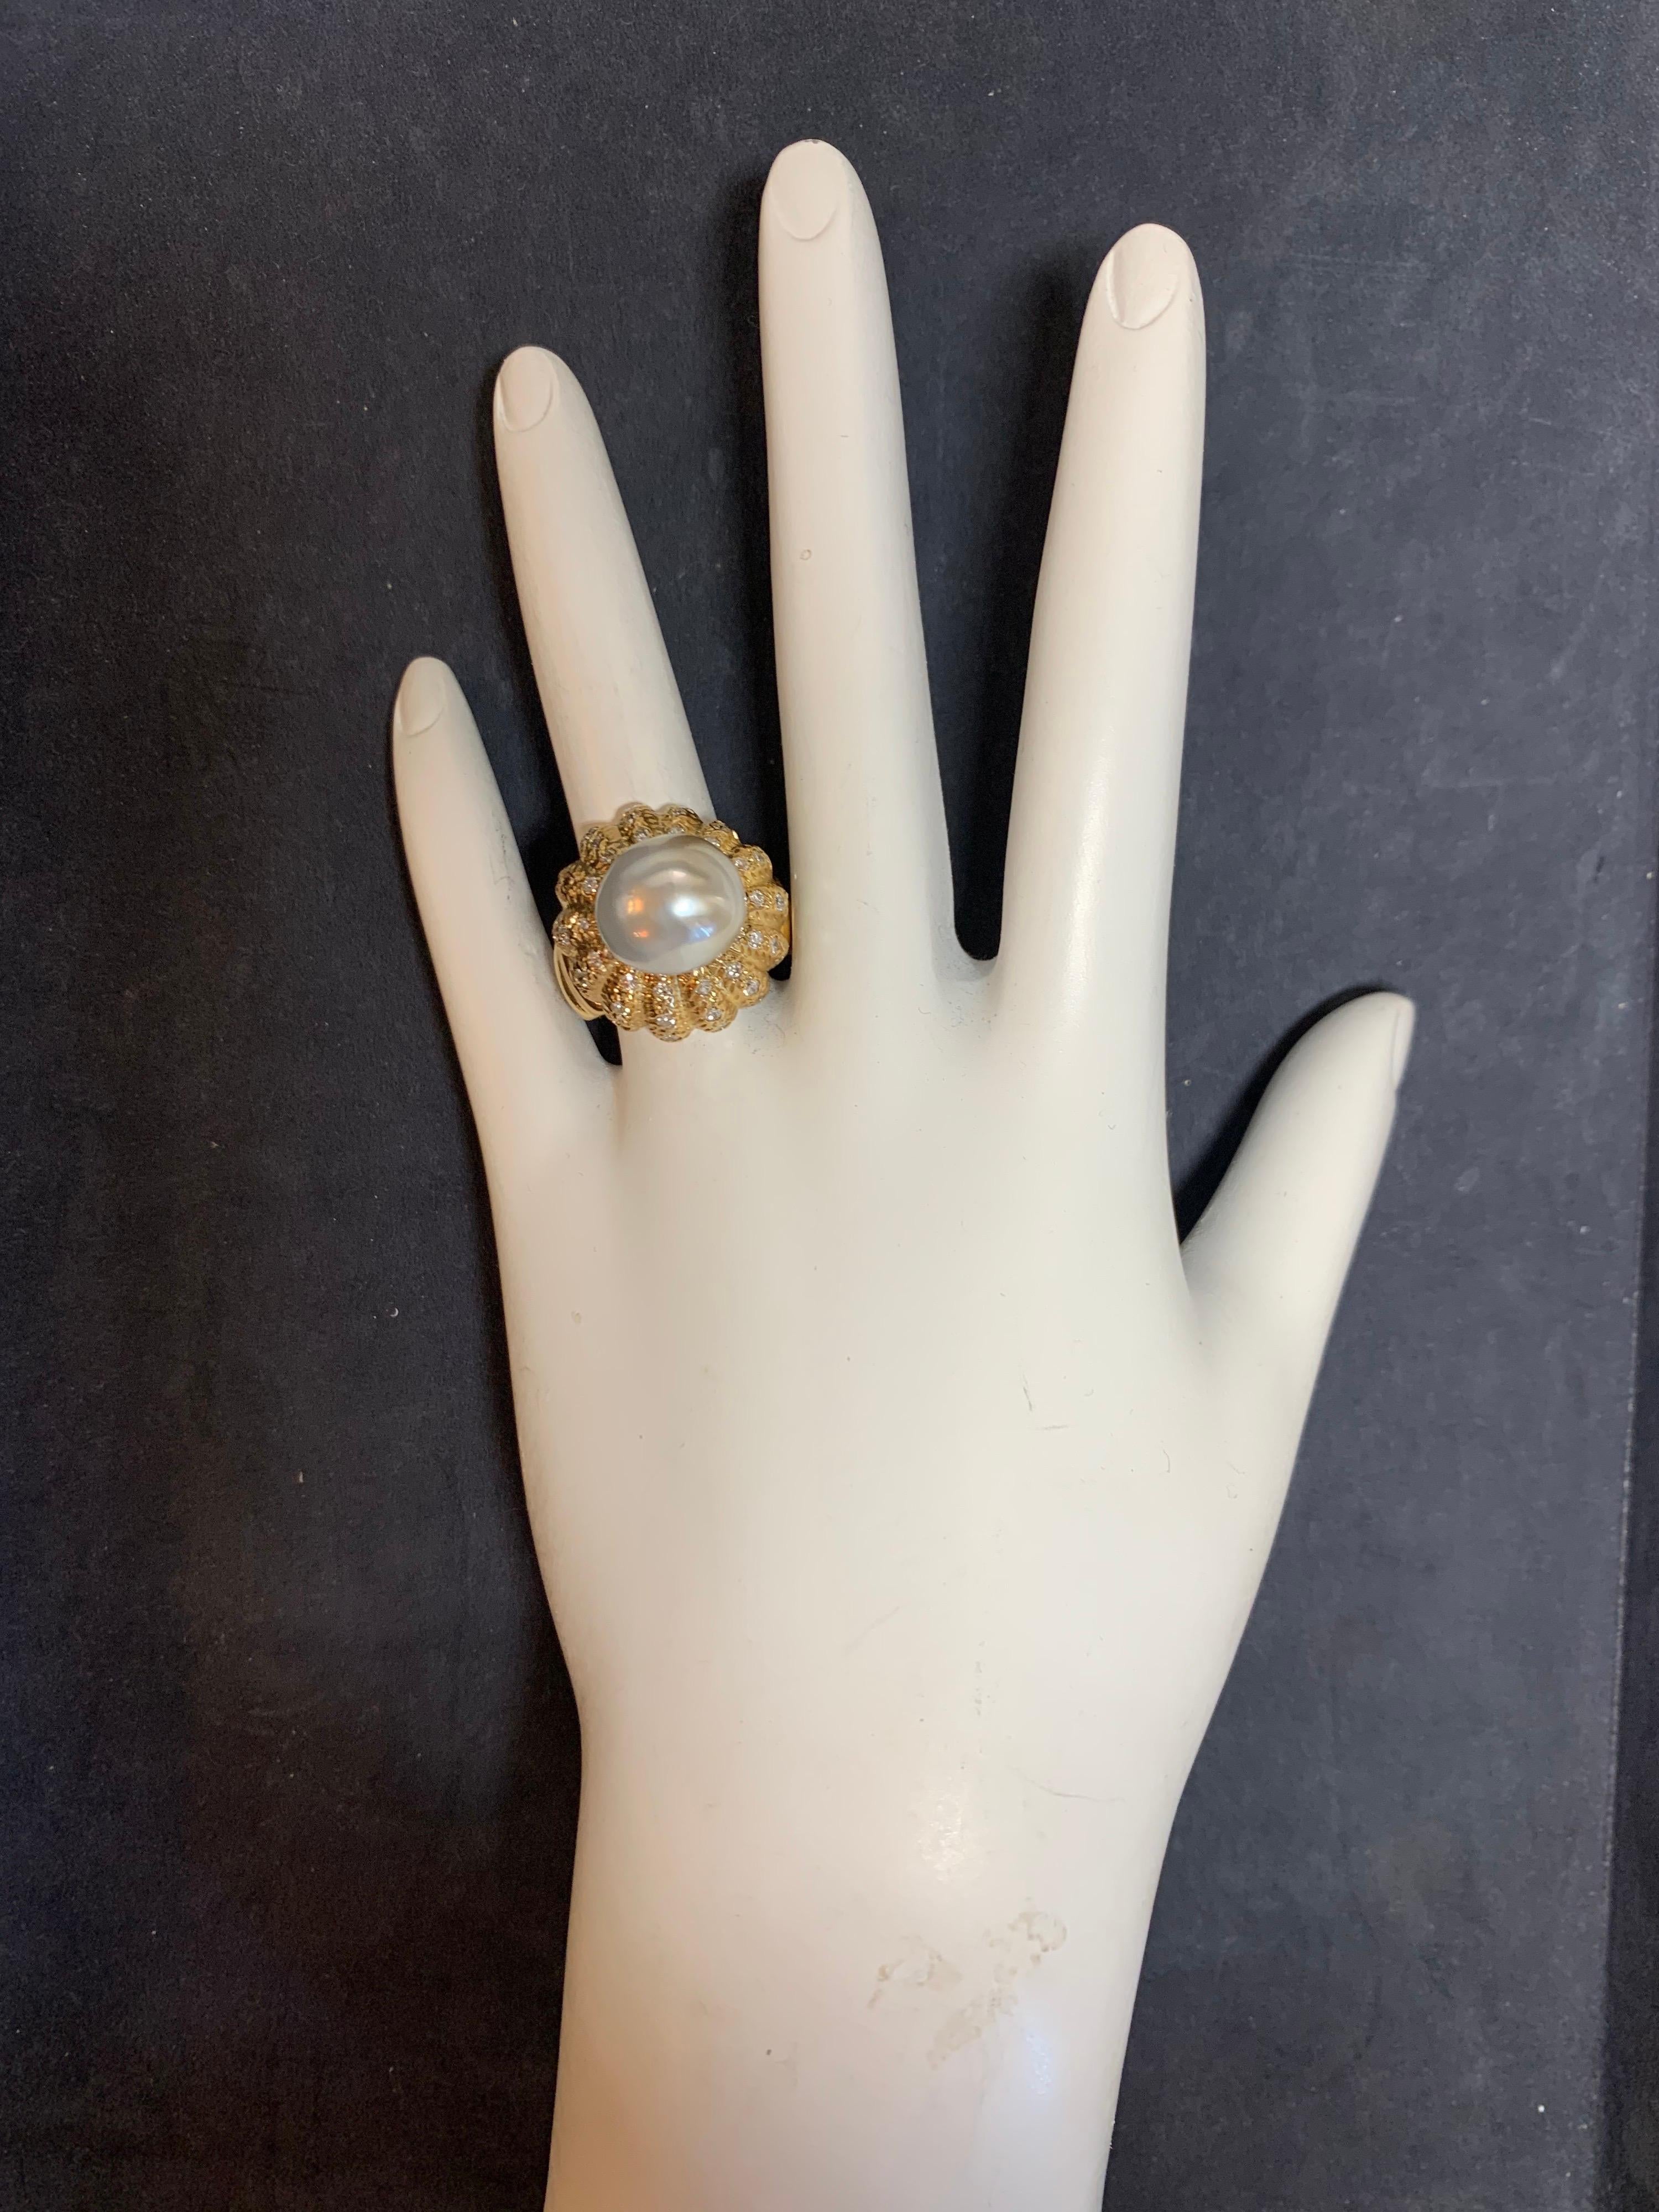 Retro 14k Yellow Gold Cocktail ring set with Natural 11mm Pearl & 0.81 Carat Natural Colorless Round Diamonds, approximately F in color and VS-SI in clarity. 

Condition is Pre-owned, weight of ring is 12.6 grams, and is a size 7.

Circa 1950. 